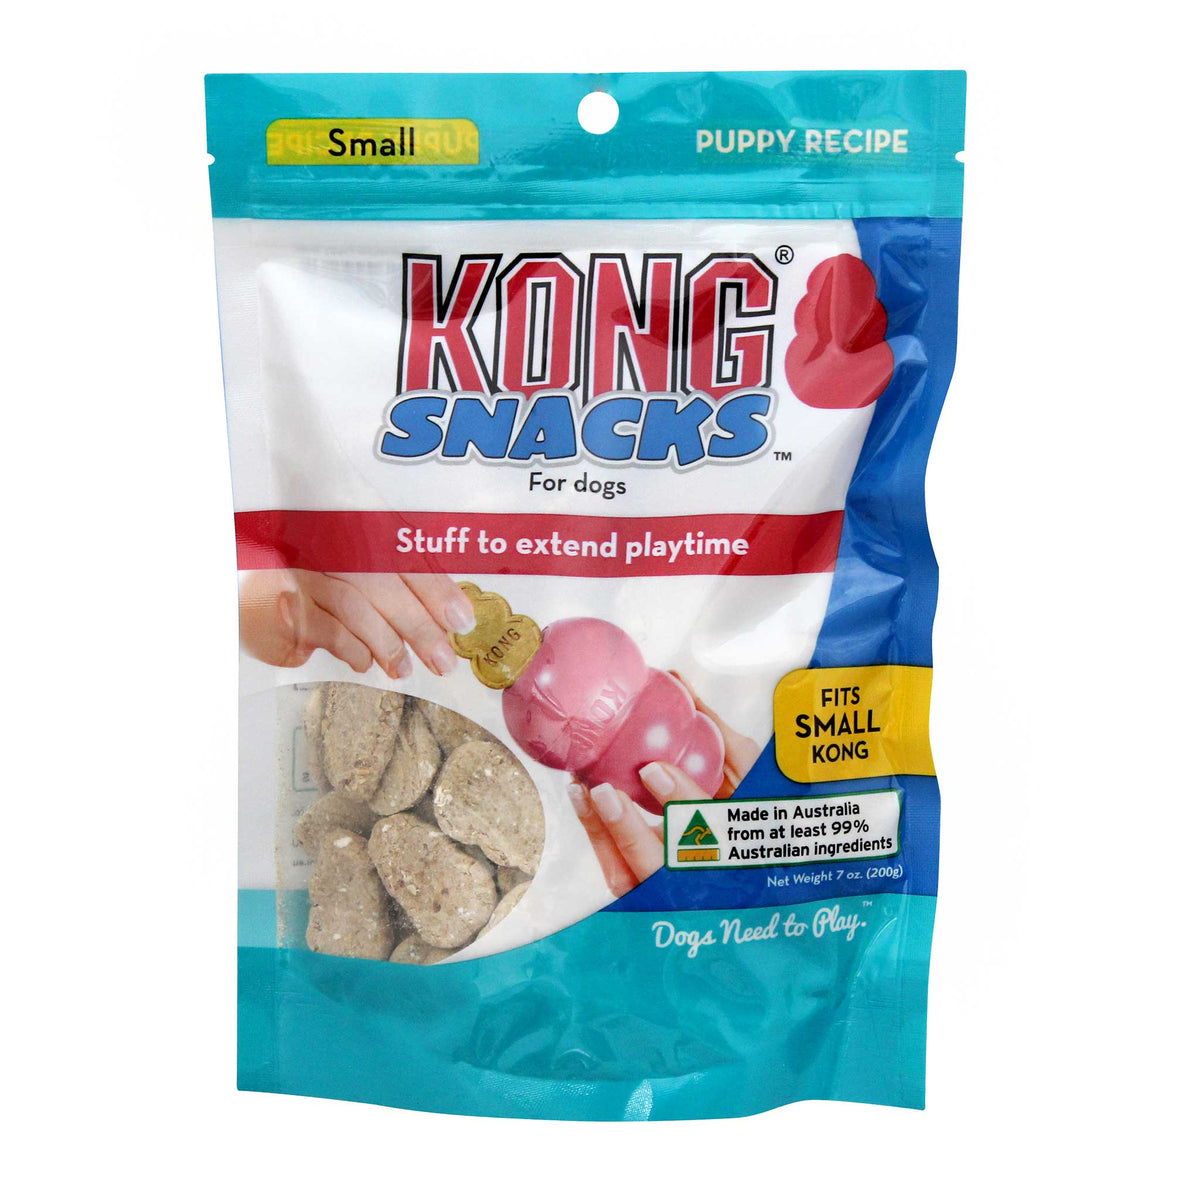 KONG Snacks for Dogs